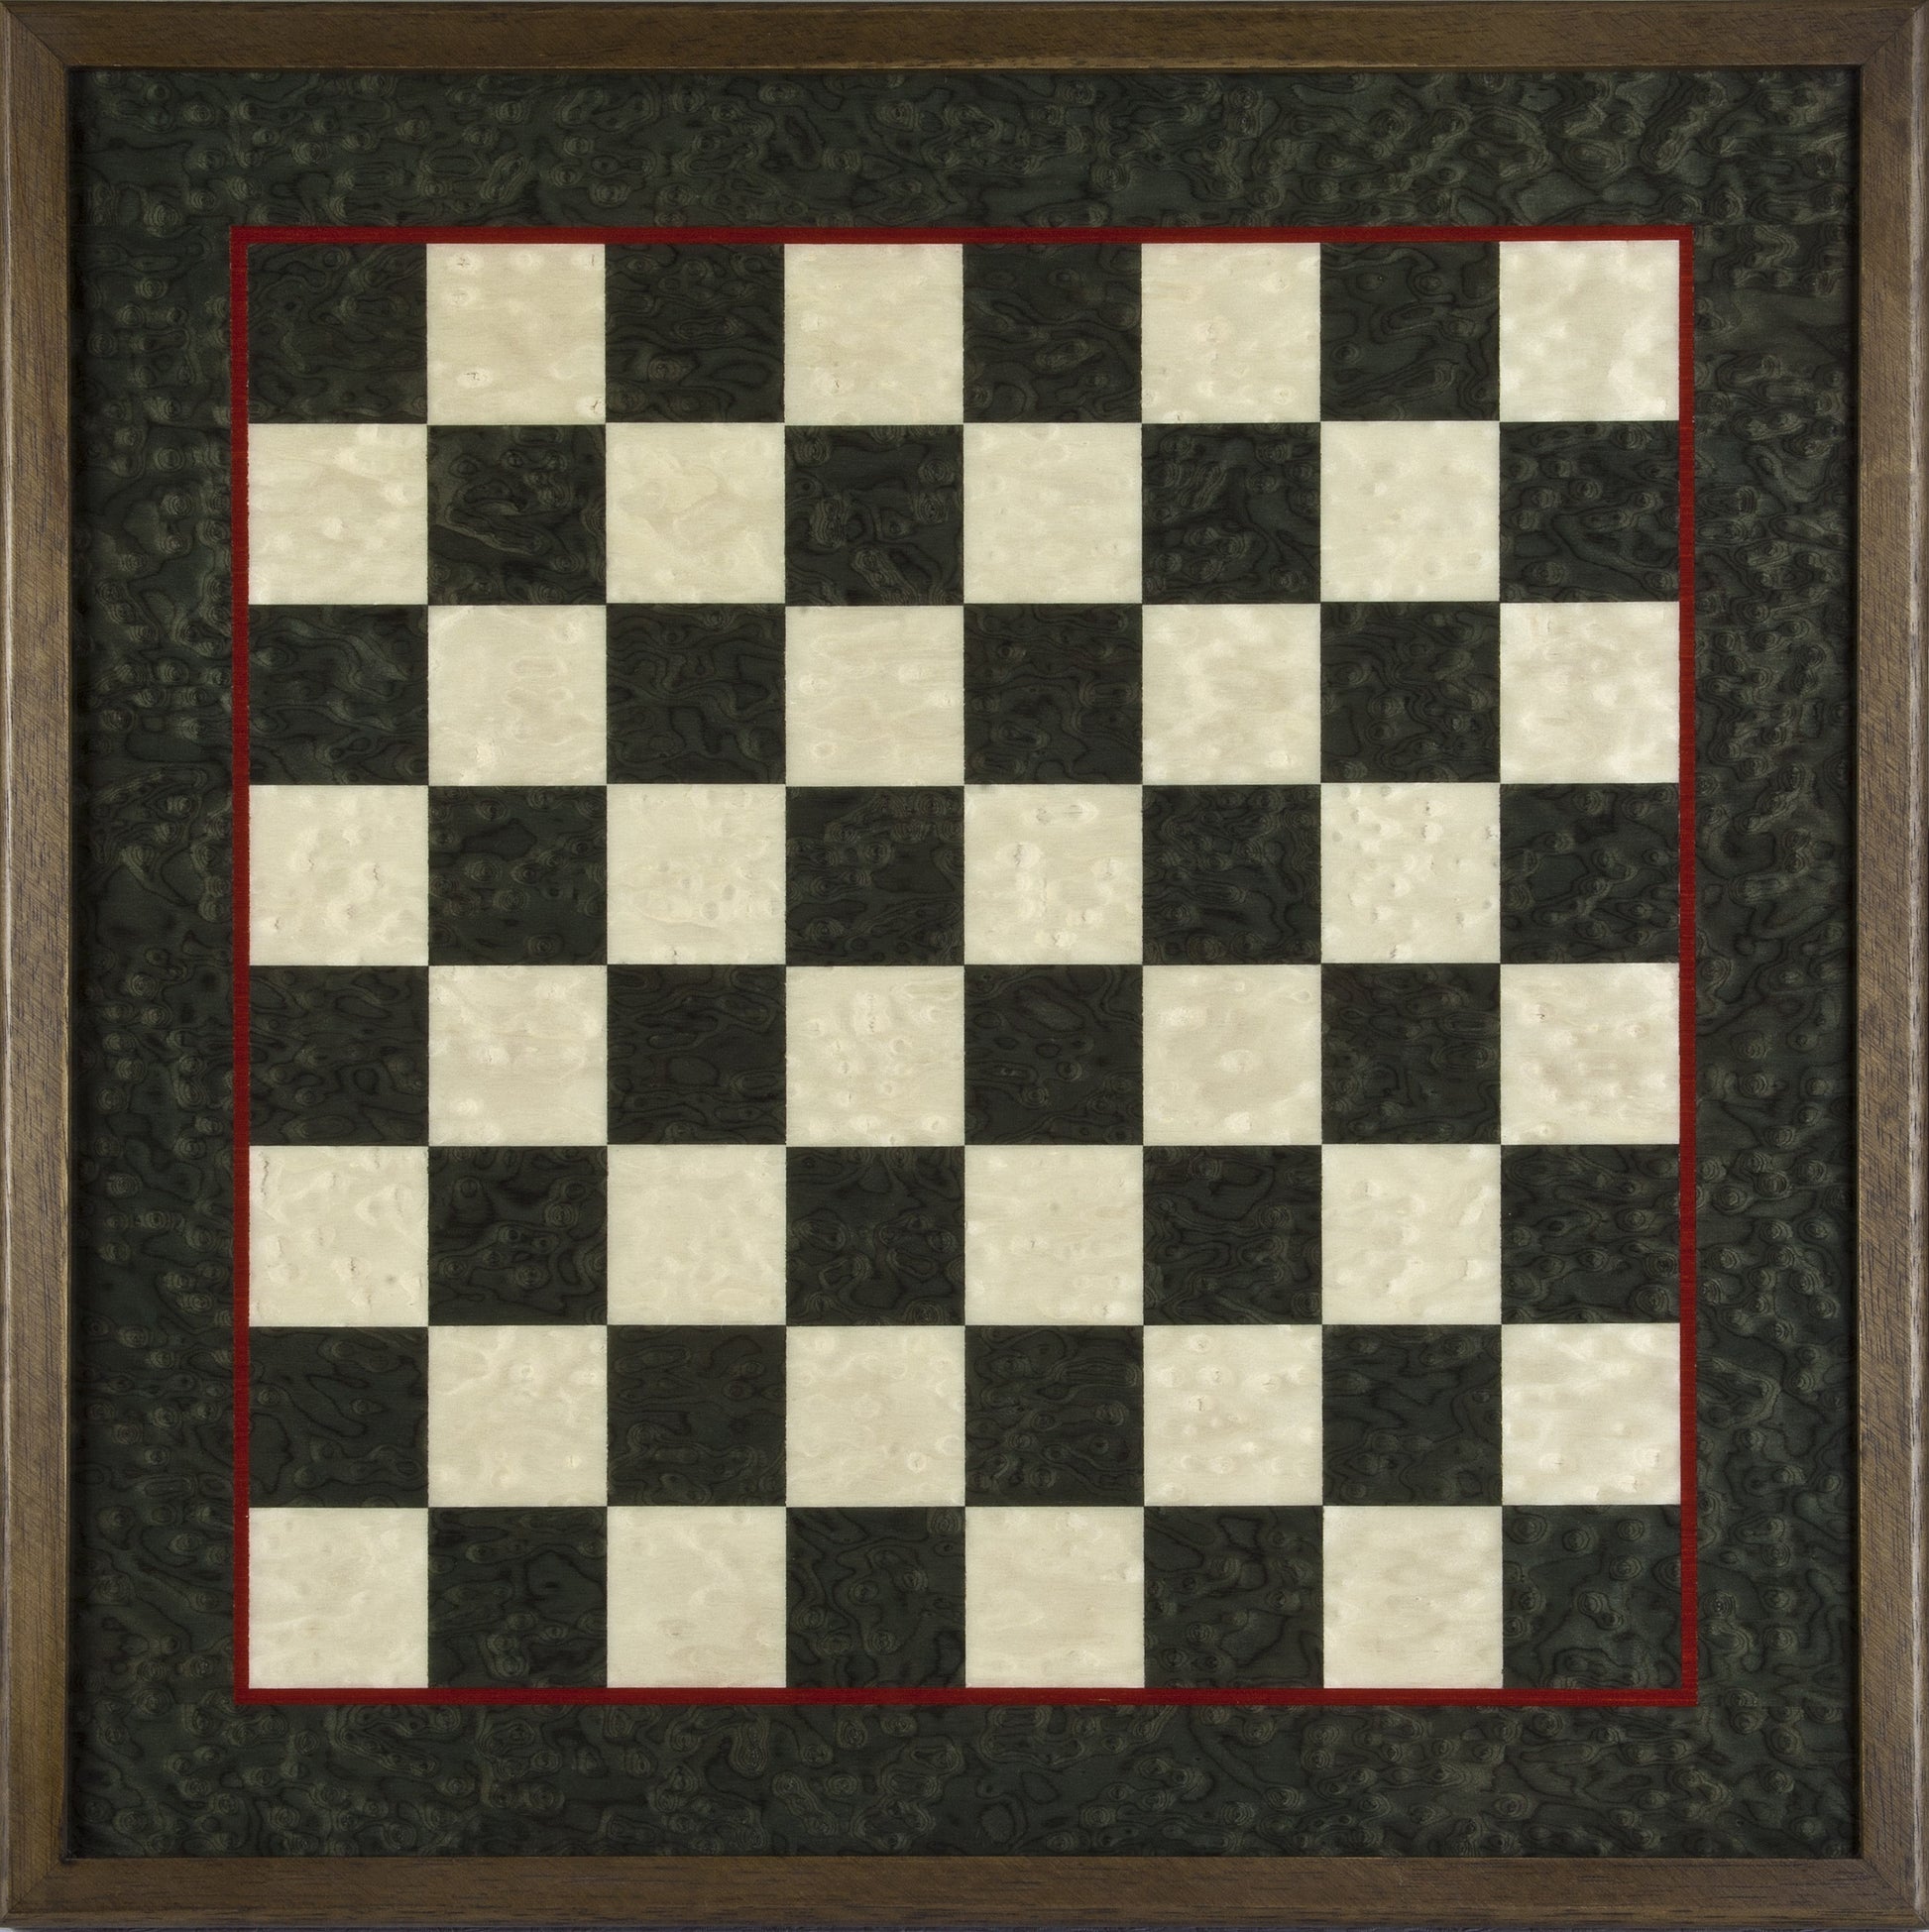 22 Inch Sophisticated Board from Italy (2 Inch Squares)